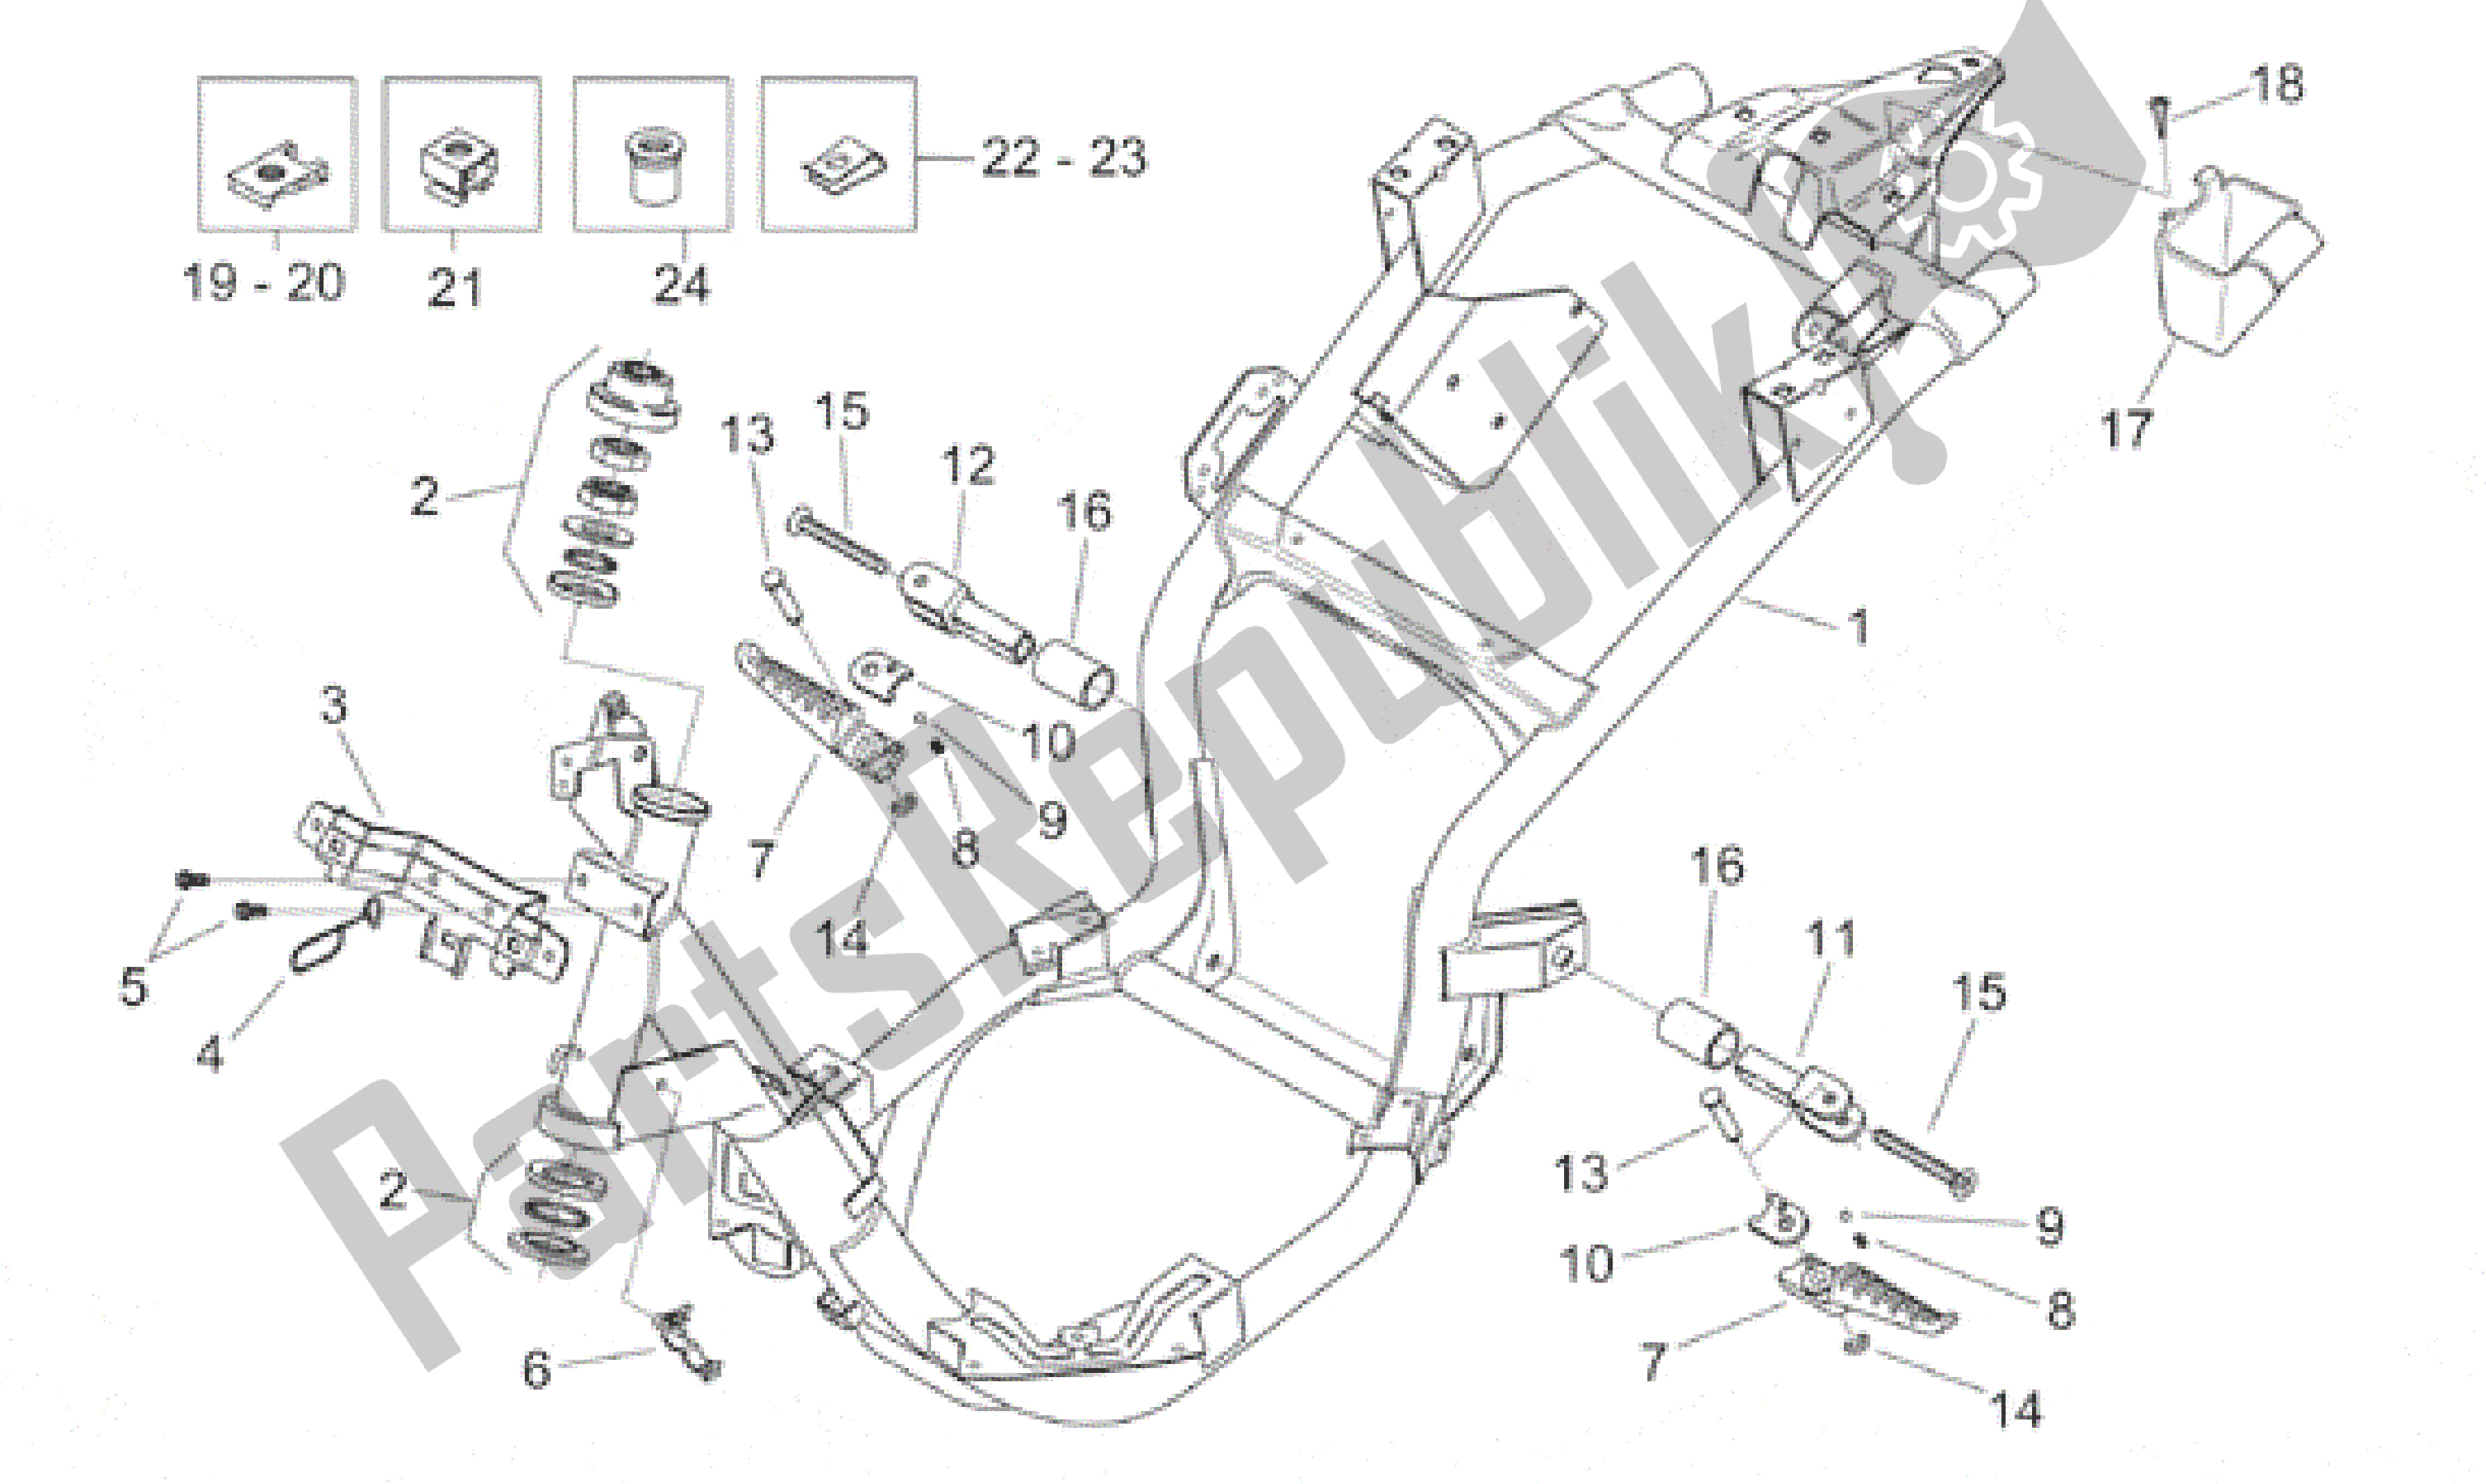 All parts for the Frame of the Aprilia Habana 125 1999 - 2001